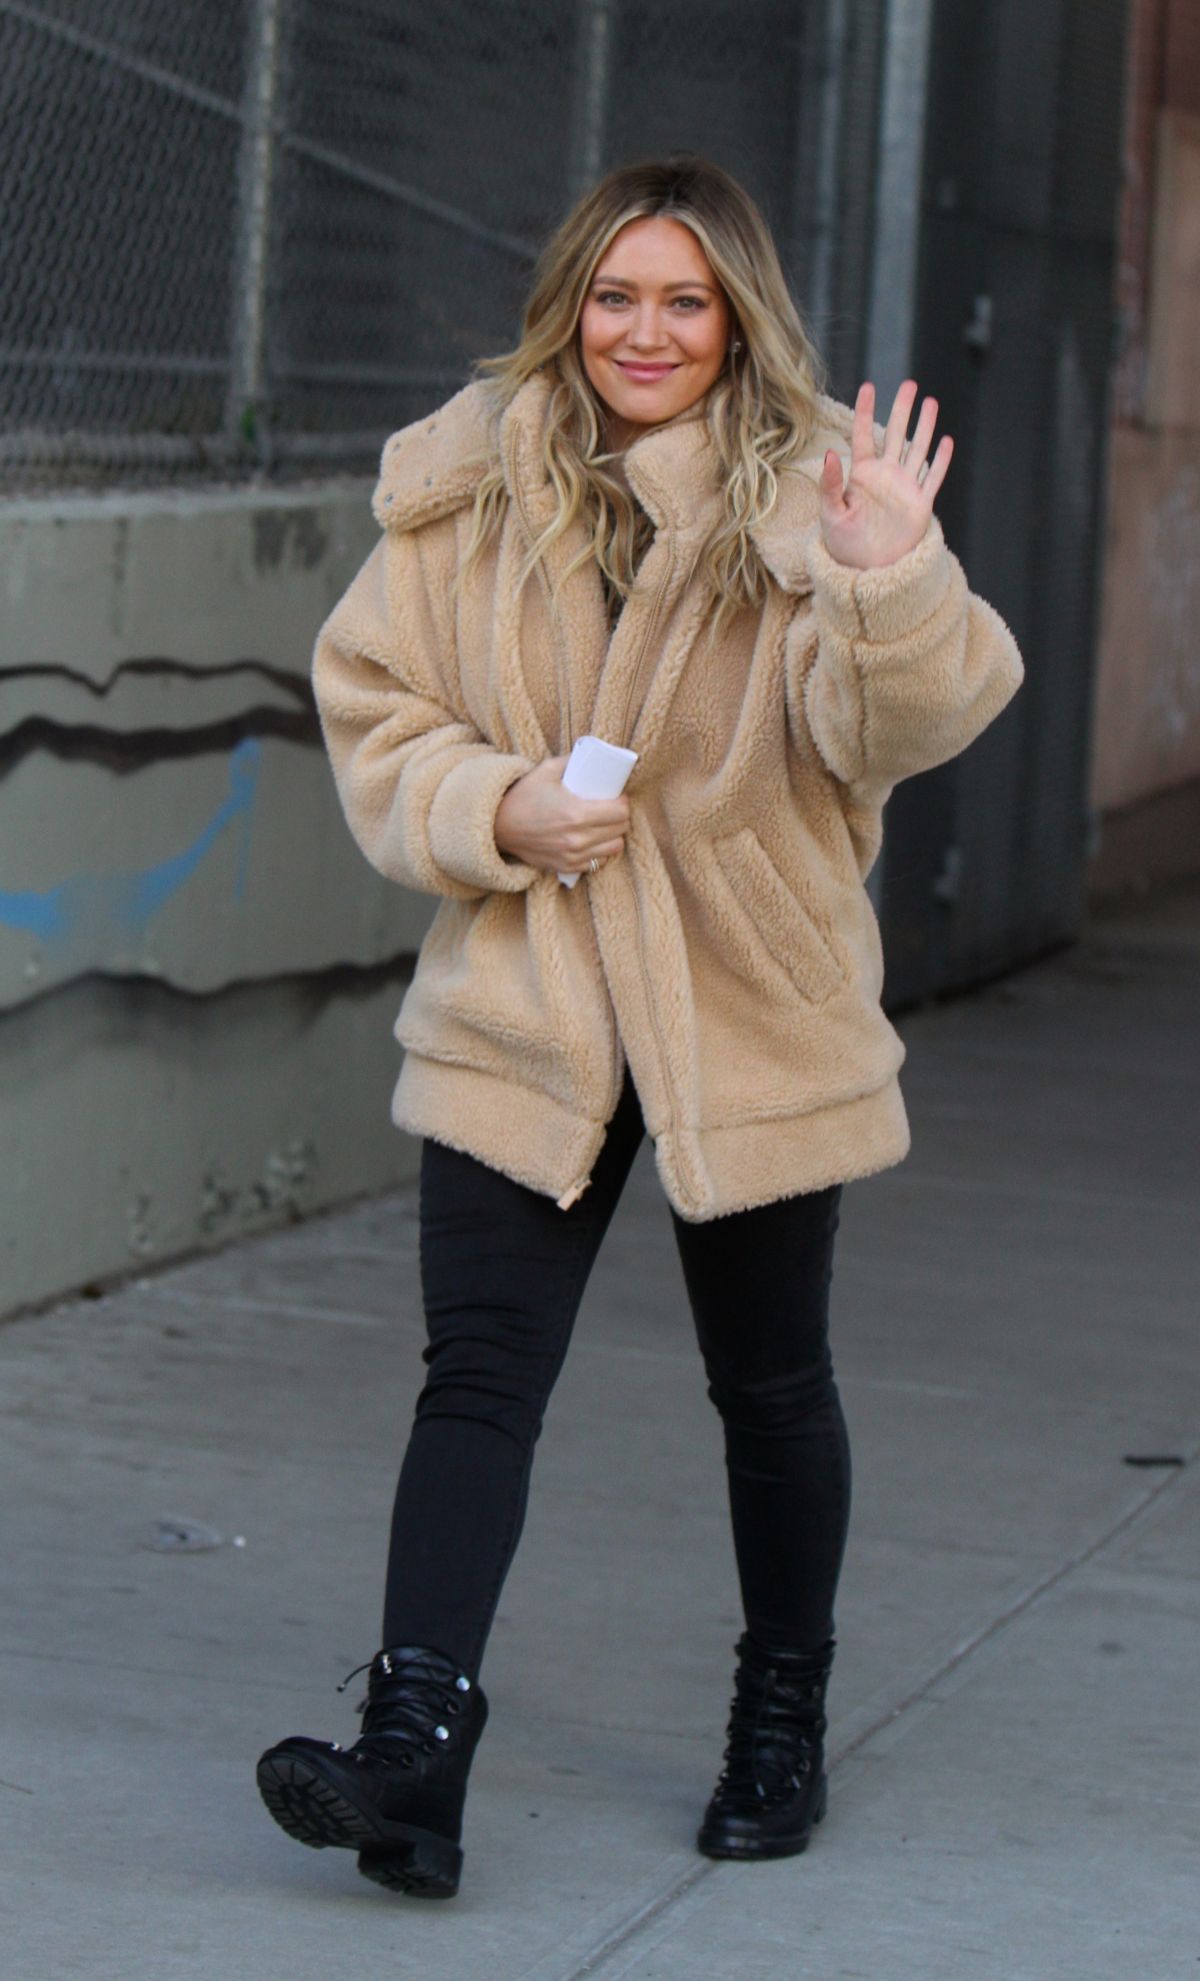 HILARY DUFF on the Set of Younger in New York 02/25/2019 – HawtCelebs